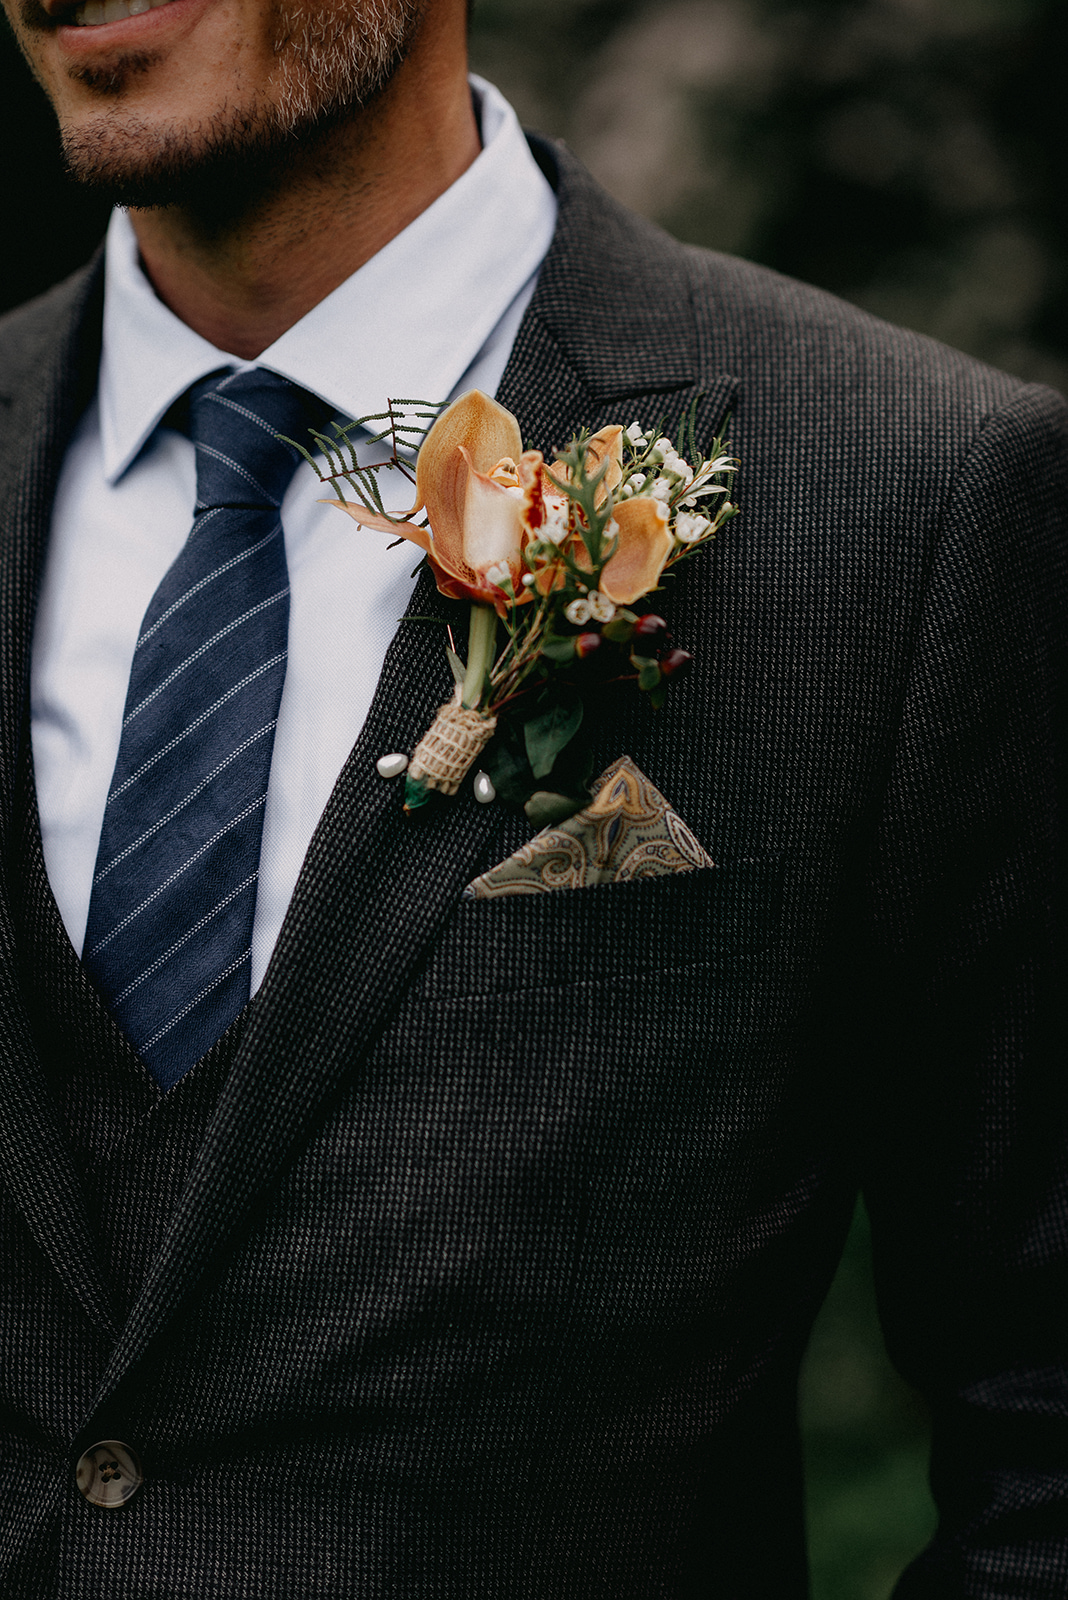 Groom boutonniere with a tweed detailed suit - Pearl Weddings & Events